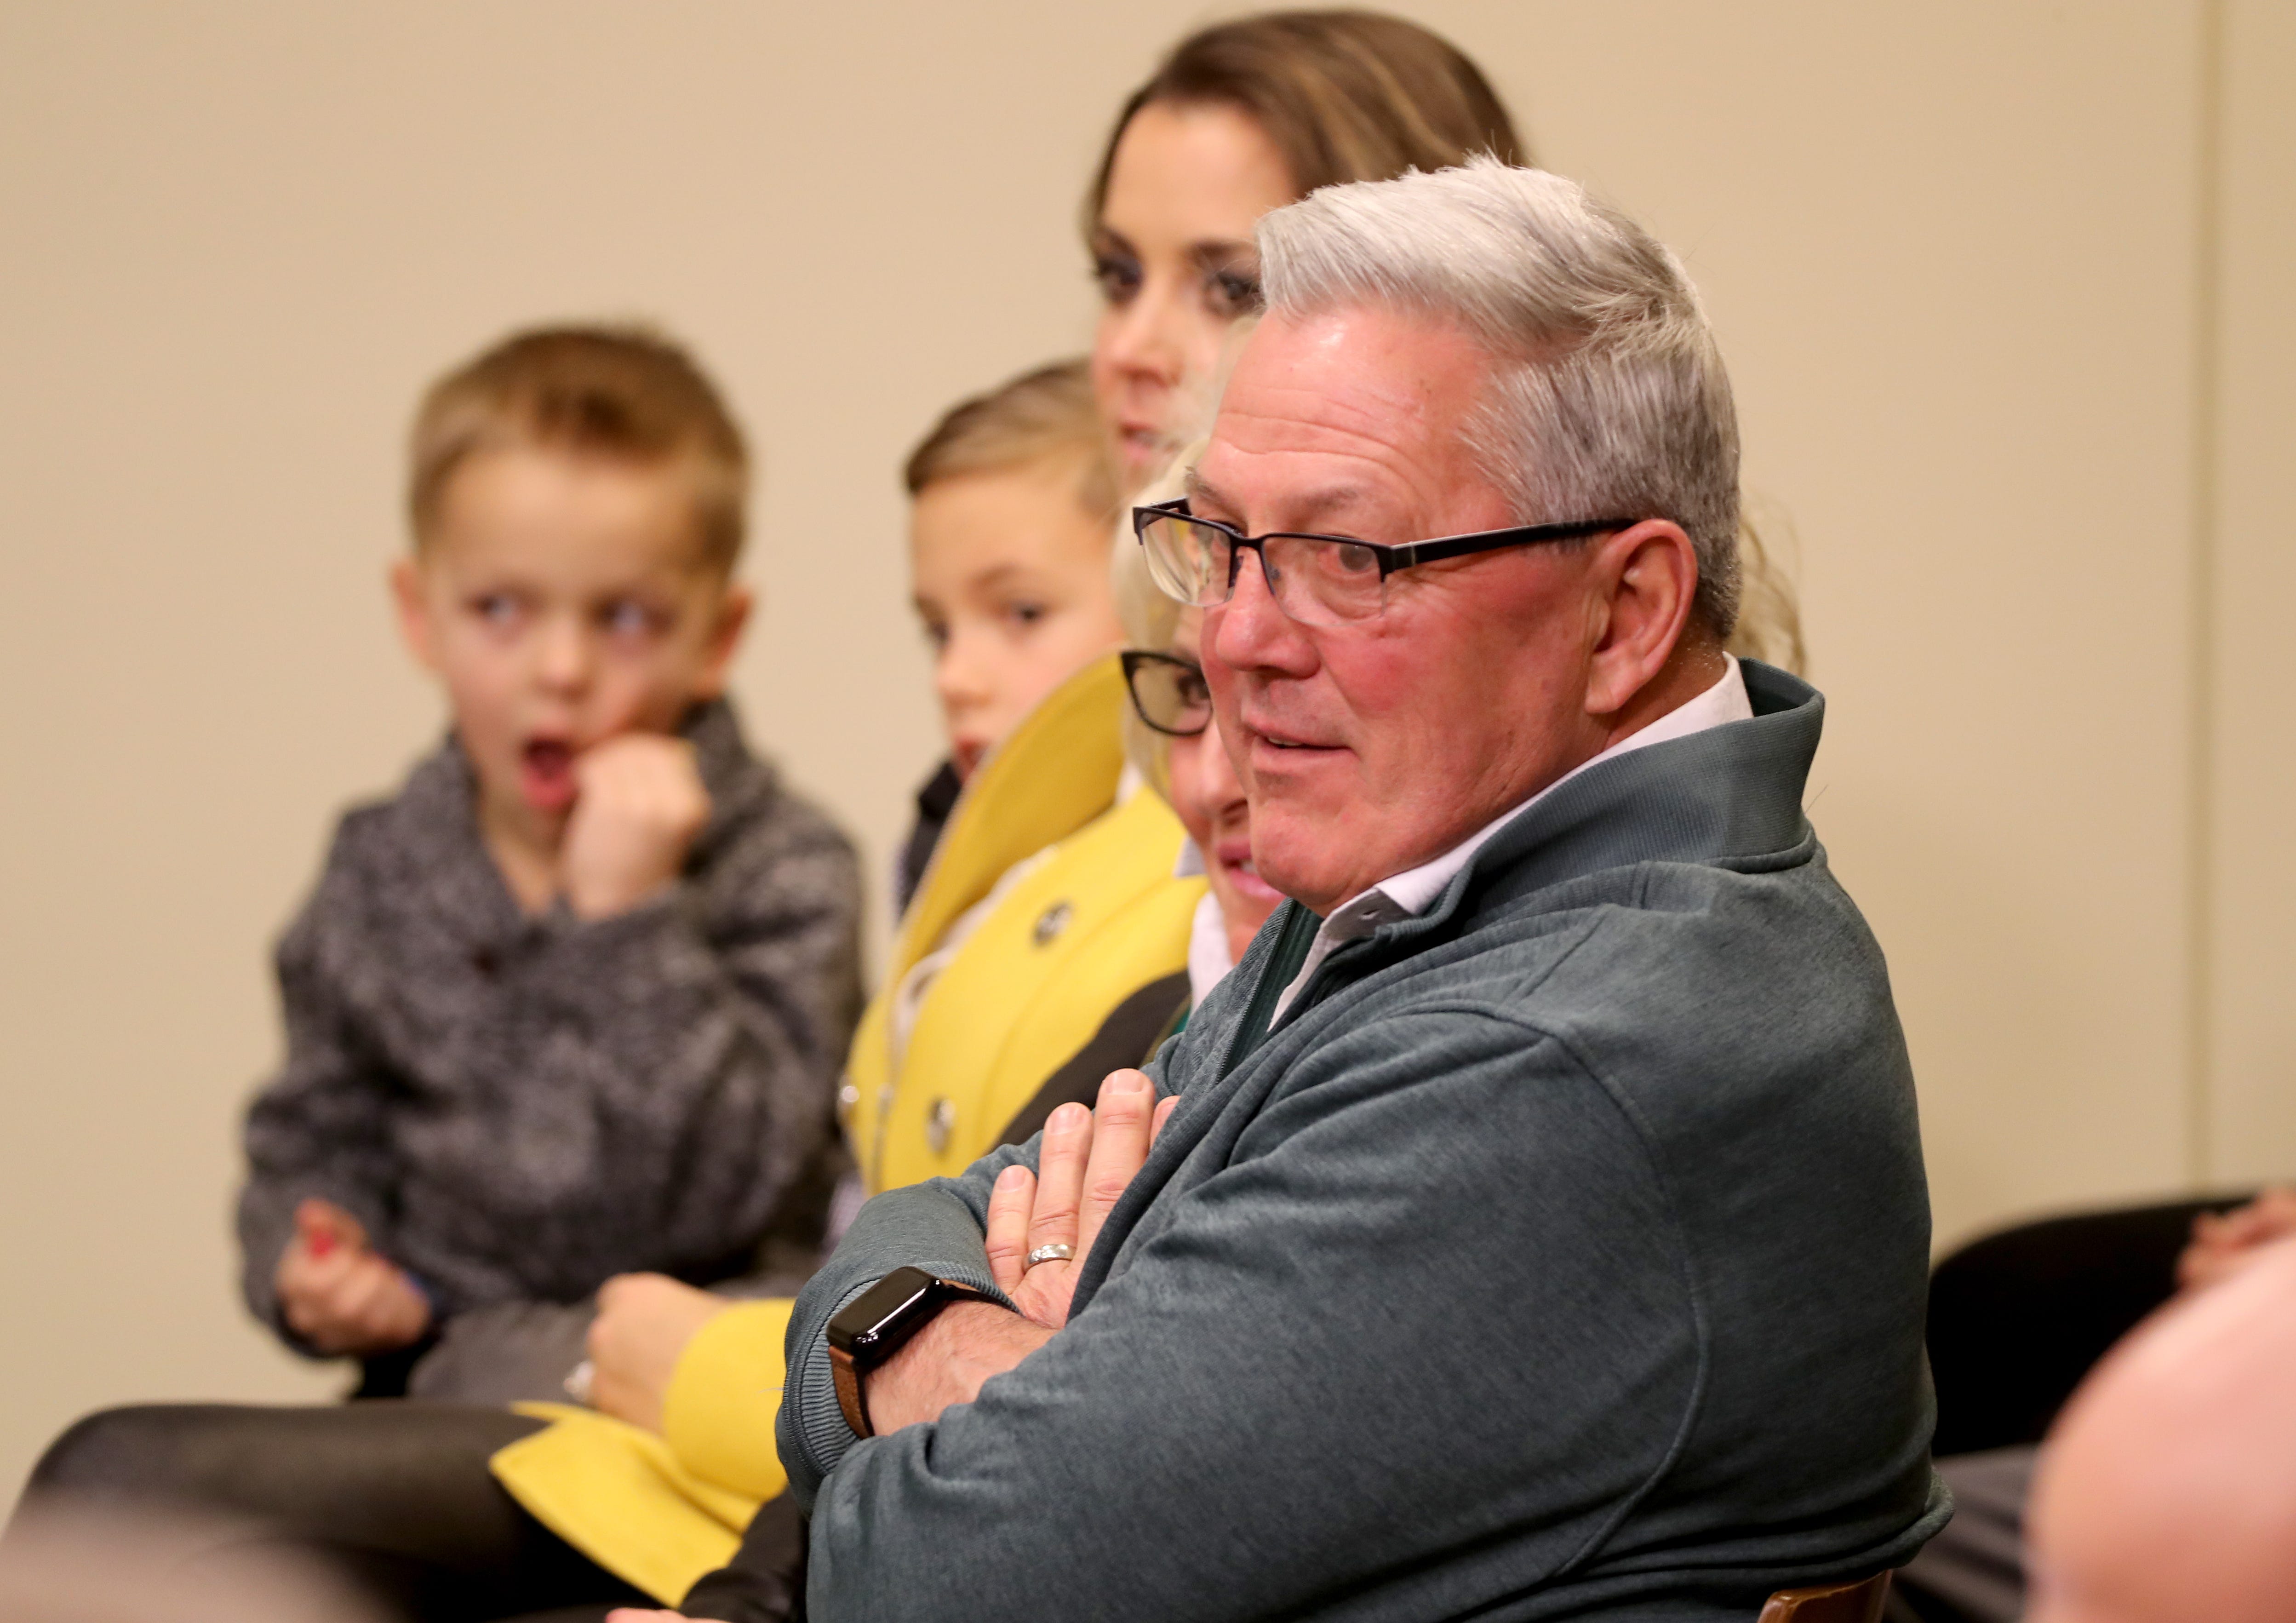 New Green Bay Packers head coach Matt LaFleur's father Denny looks on during media questioning as LaFleur is introduced during a press conference in the Lambeau Field media auditorium Wednesday, January 9, 2019 in Green Bay, Wis.